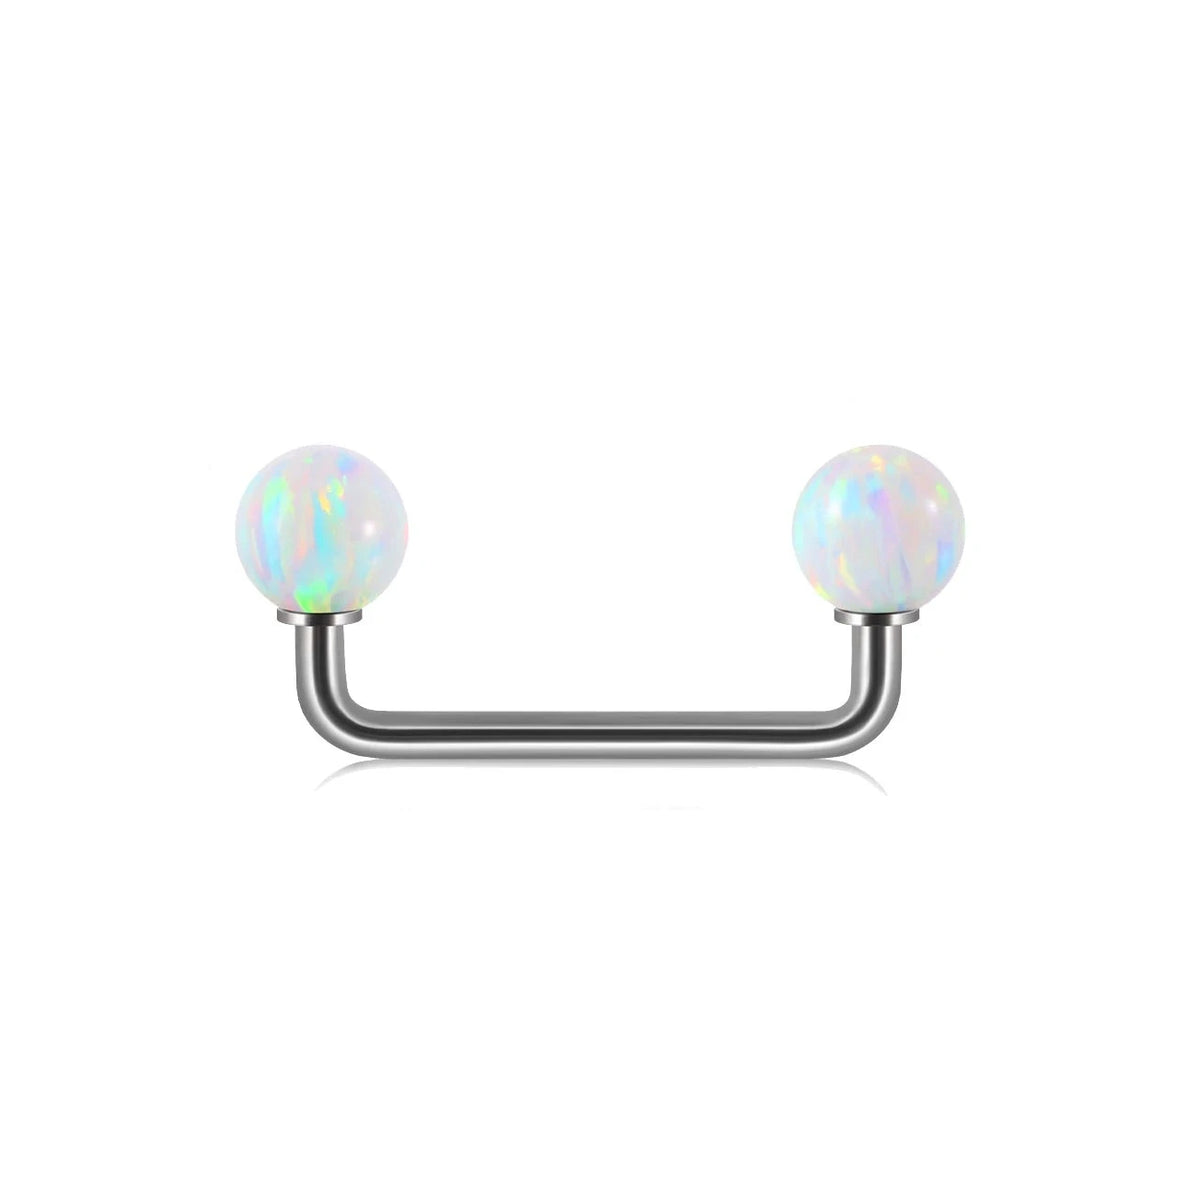 Surface barbell with opal white blue purple green opal titanium surface bar piercings 16G